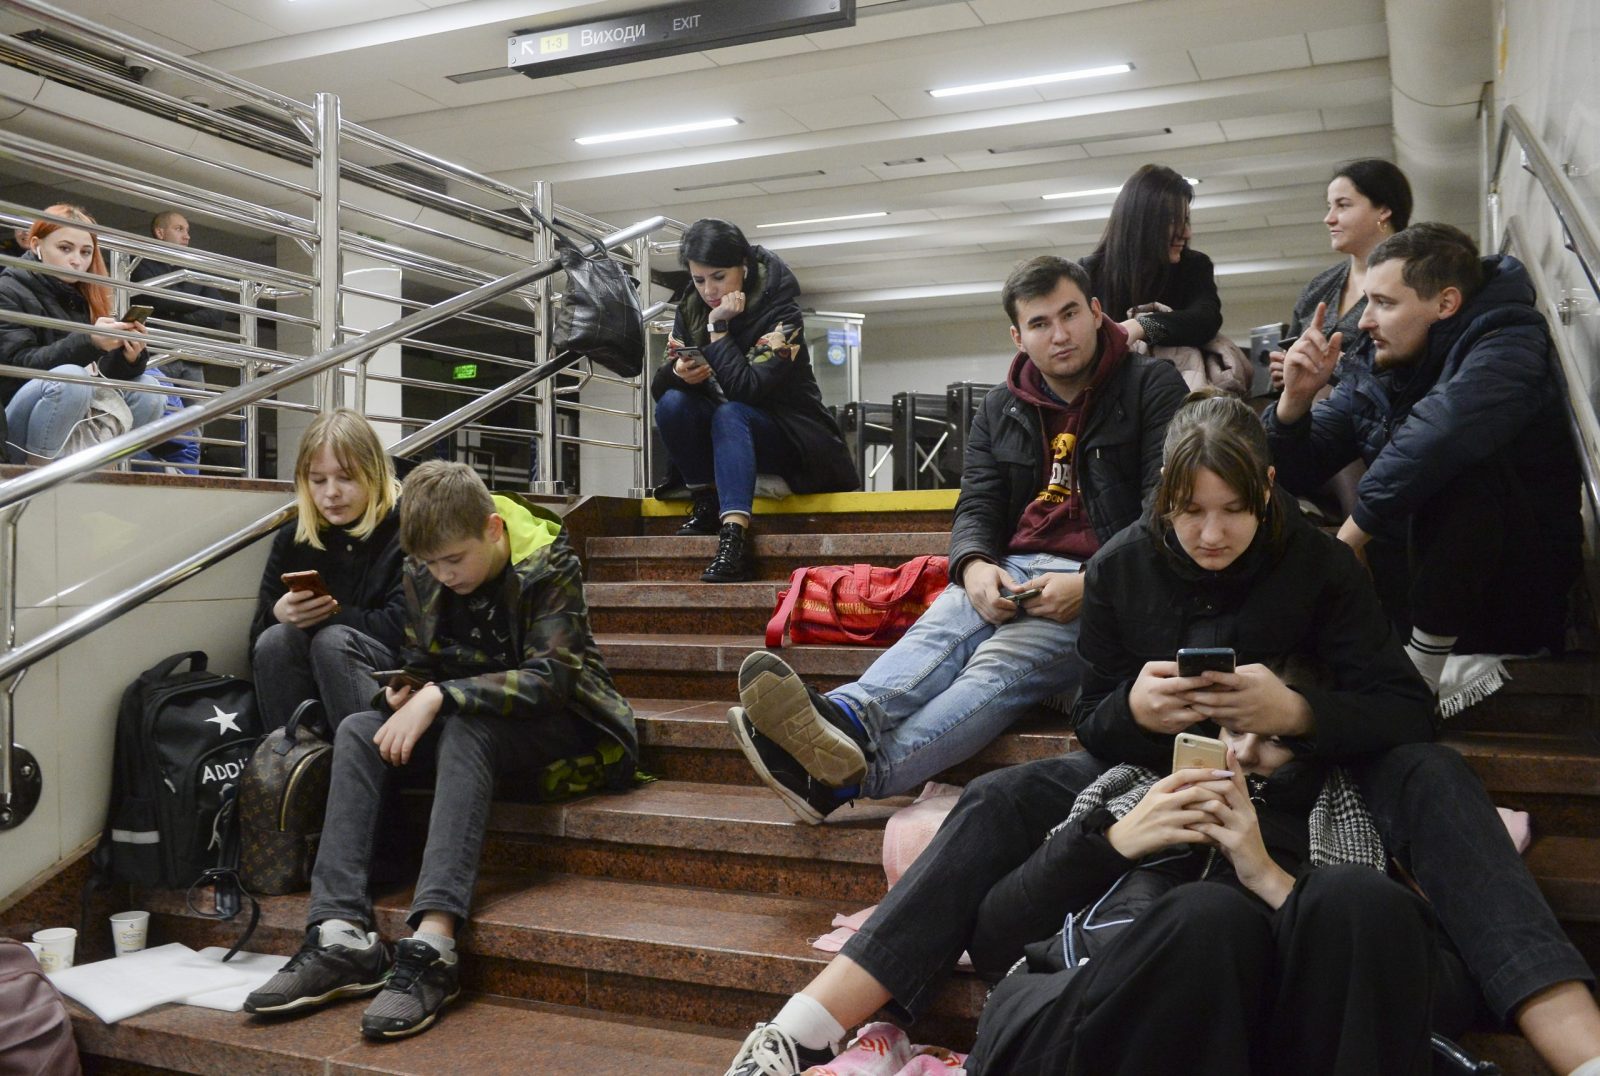 epa10276511 People check their phones as they shelter inside a metro station after a shelling in Kyiv (Kiev), Ukraine, 31 October 2022, amid the ongoing Russian invasion. Explosions have been reported in several districts around Ukraine on 31 October. Kyiv Mayor Vitali Klitschko said on social media that power engineers were working to restore electricity supply after damage to an energy facility that powers around 350,000 apartments in Kyiv. Some parts of the city were left with no water as a result of strikes on critical infrastructure facilities, the mayor added.  EPA/ANDRII NESTERENKO